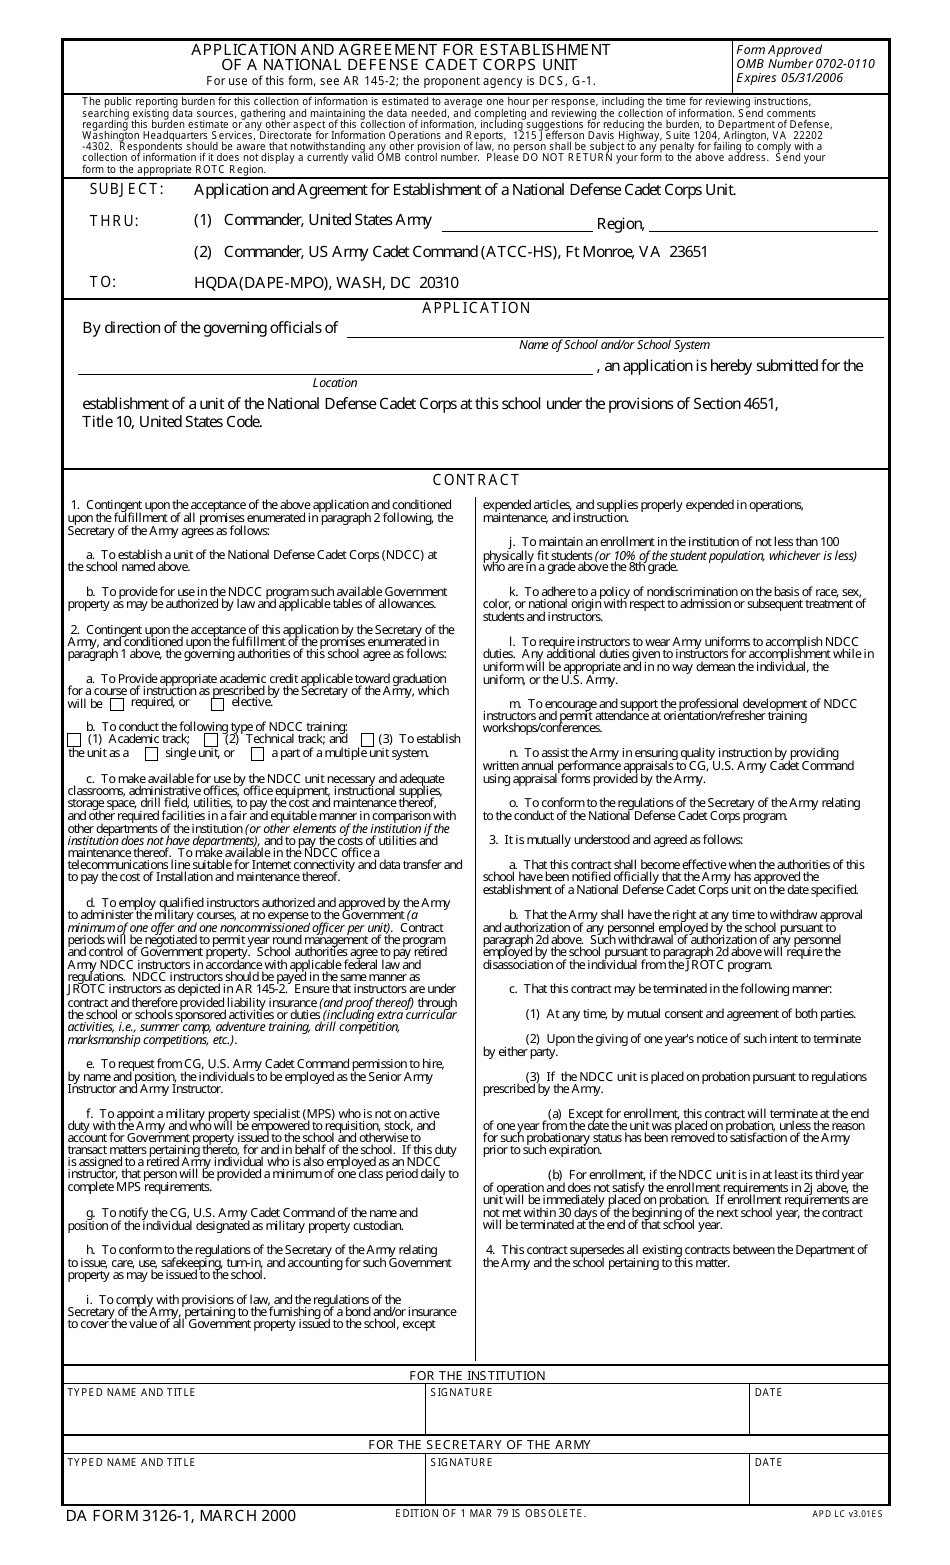 DA Form 3126-1 Application and Agreement for Establishment of a National Defense Cadet Corps Unit (Si Milpercen), Page 1